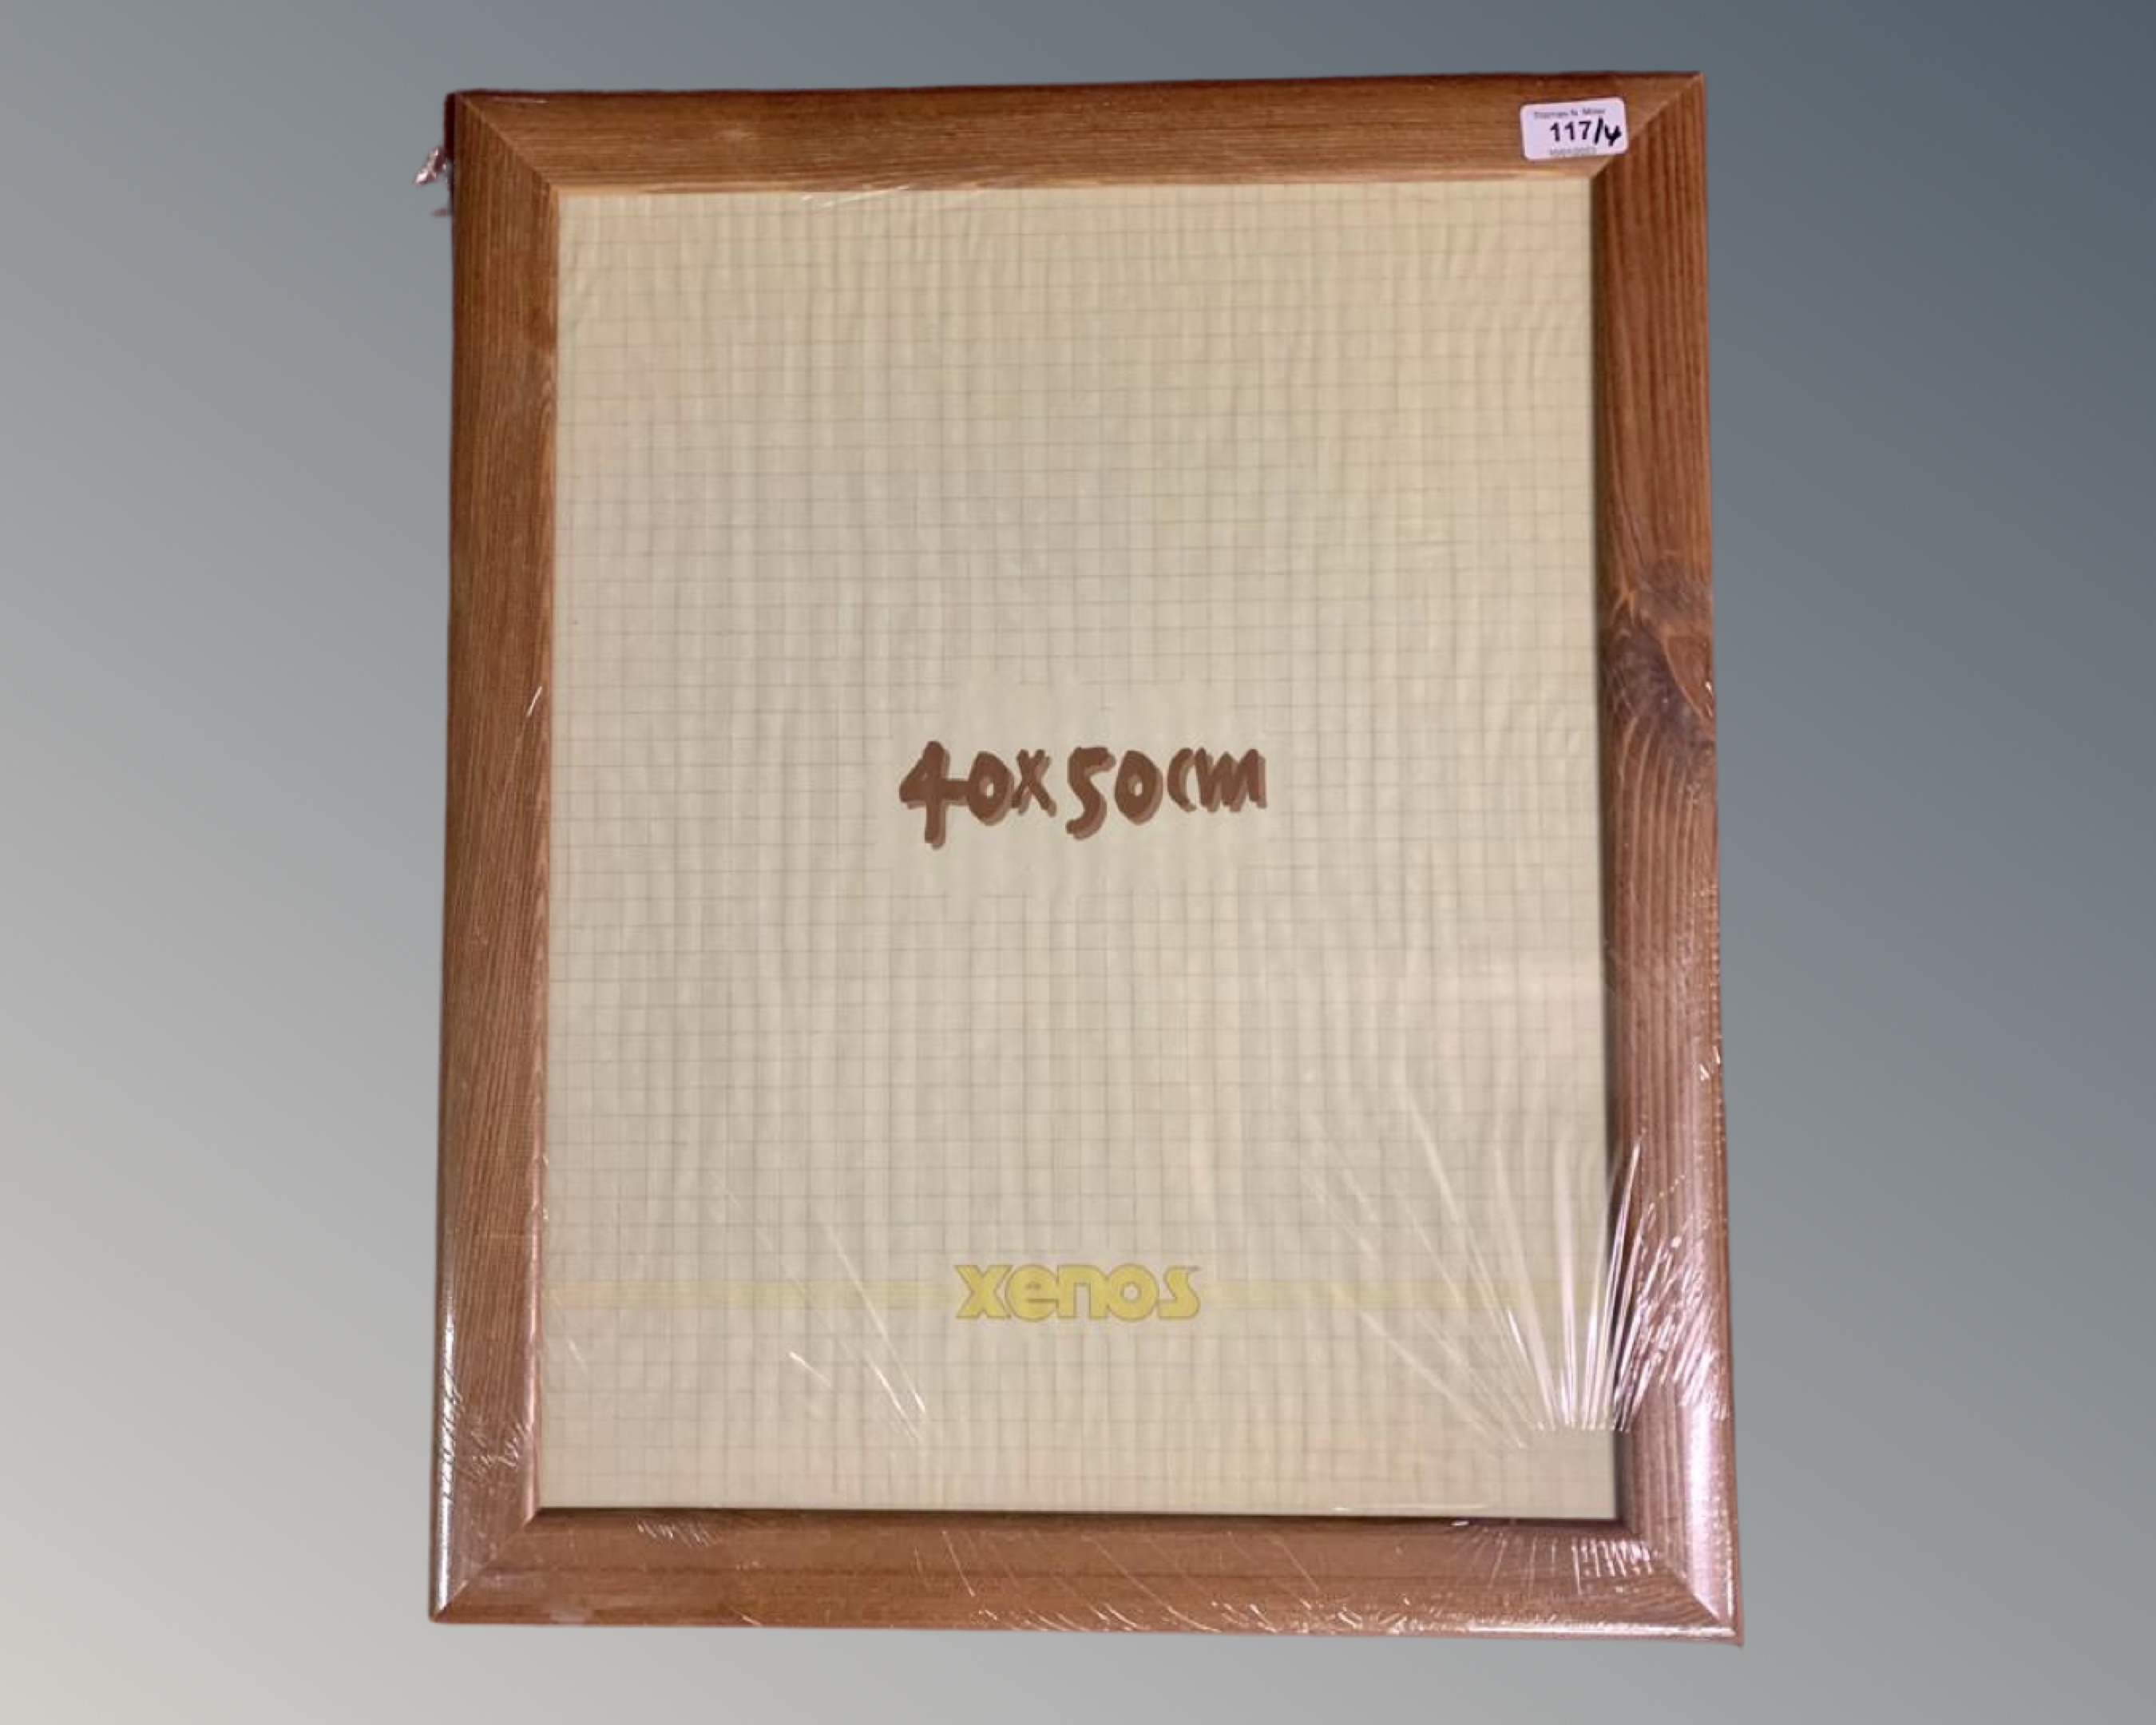 Four large Xenos wooden 40 cm x 50 cm photo frames, all brand new and still in original packaging.